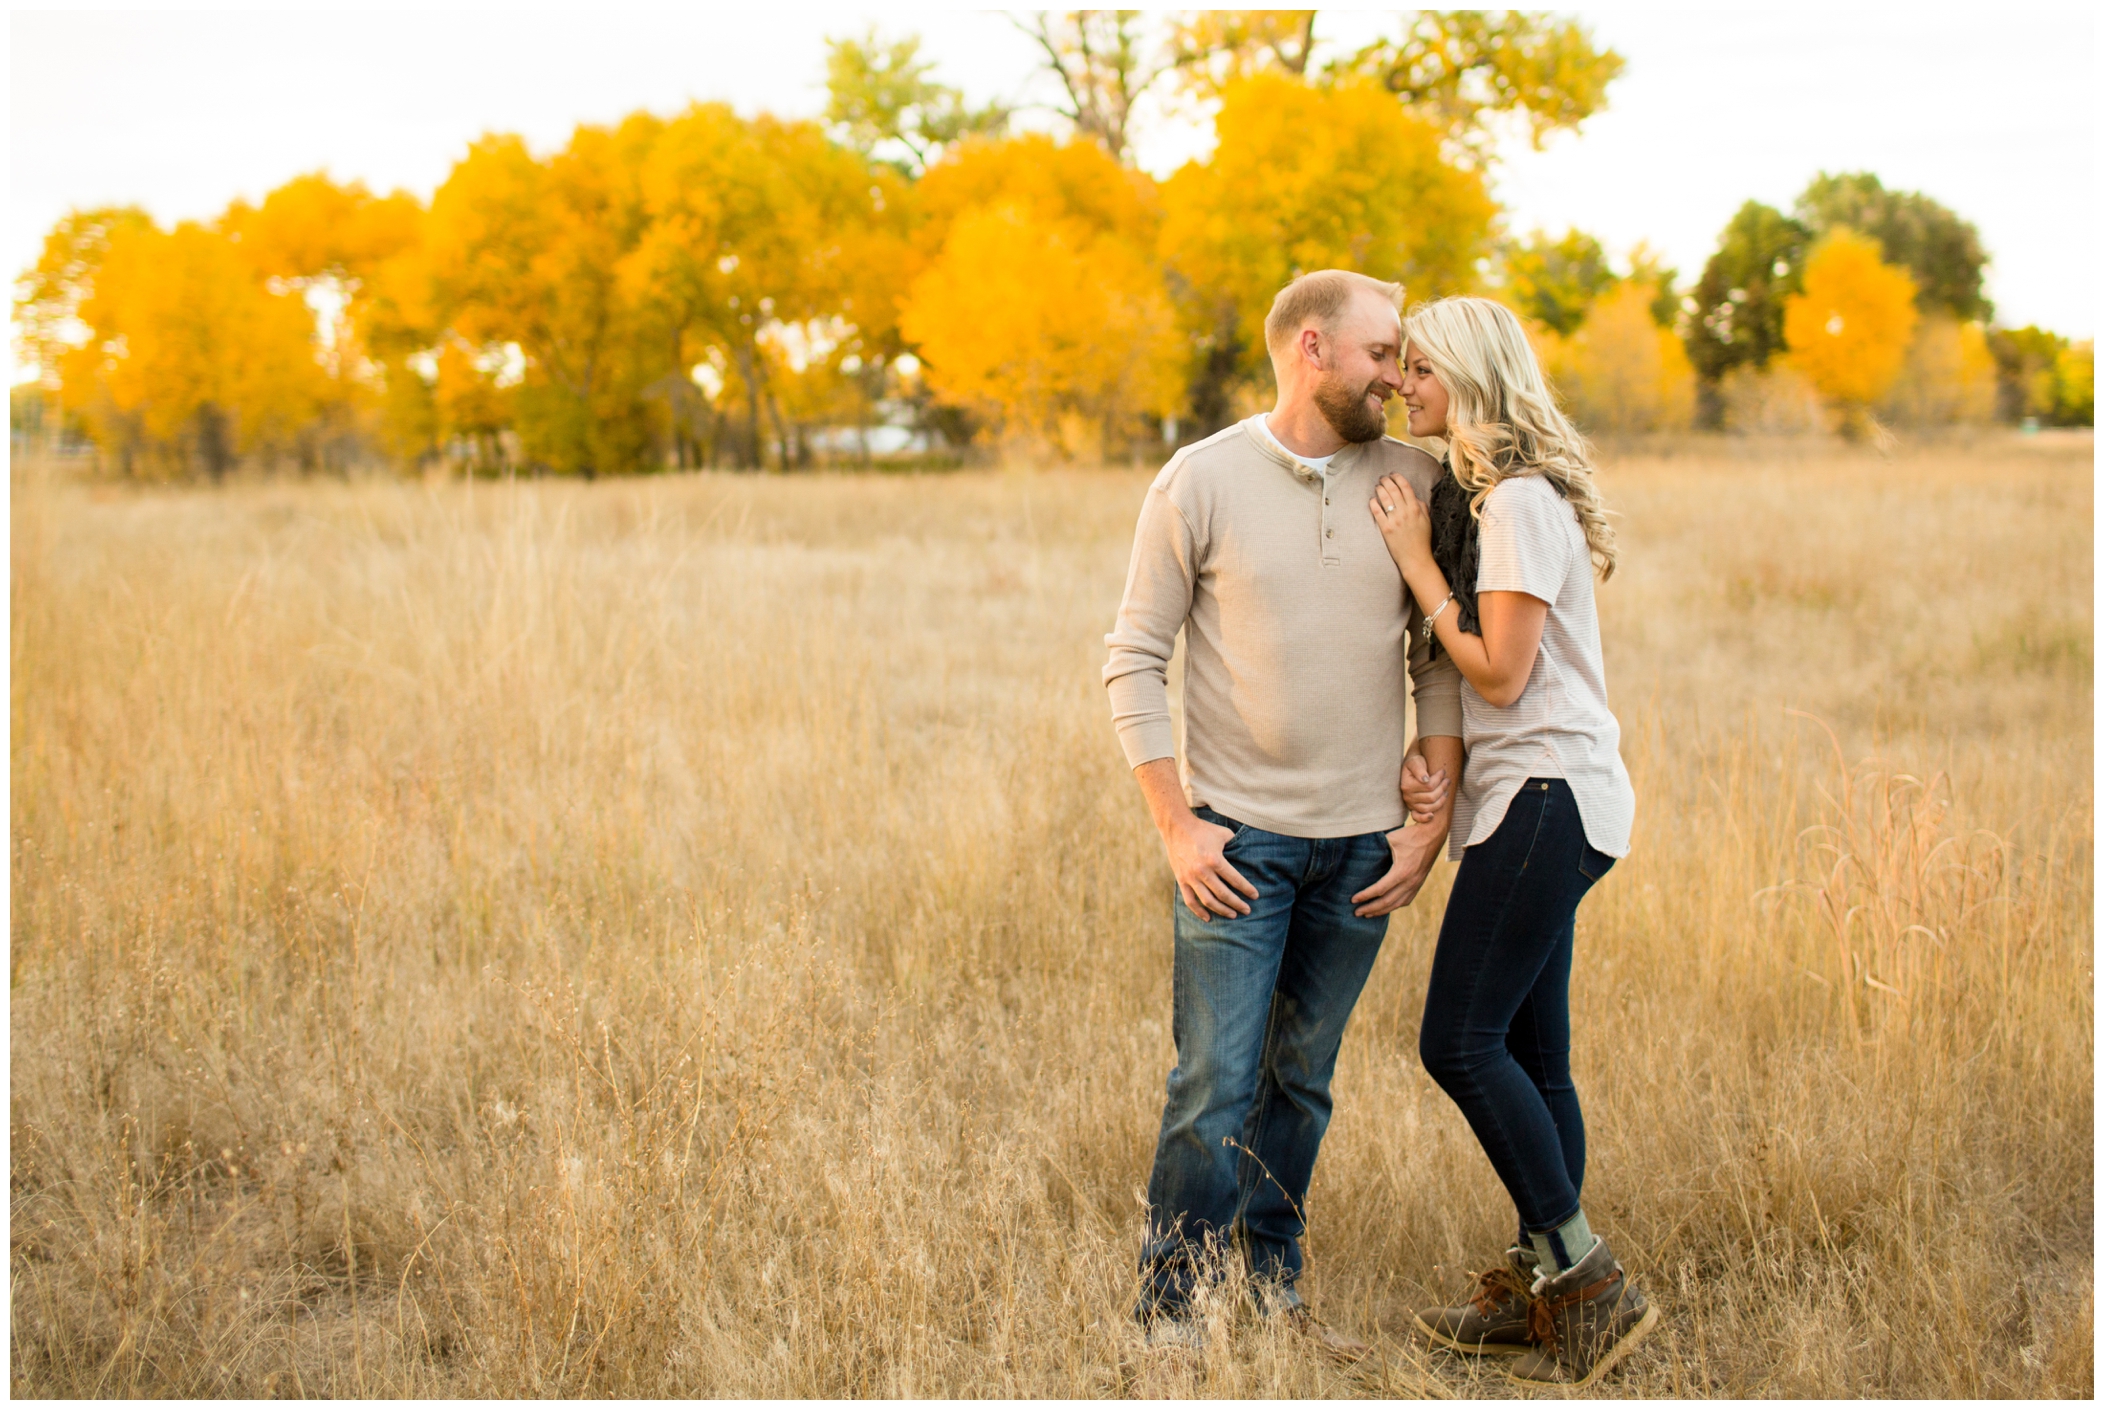 Ft. Collins engagement and wedding photographer